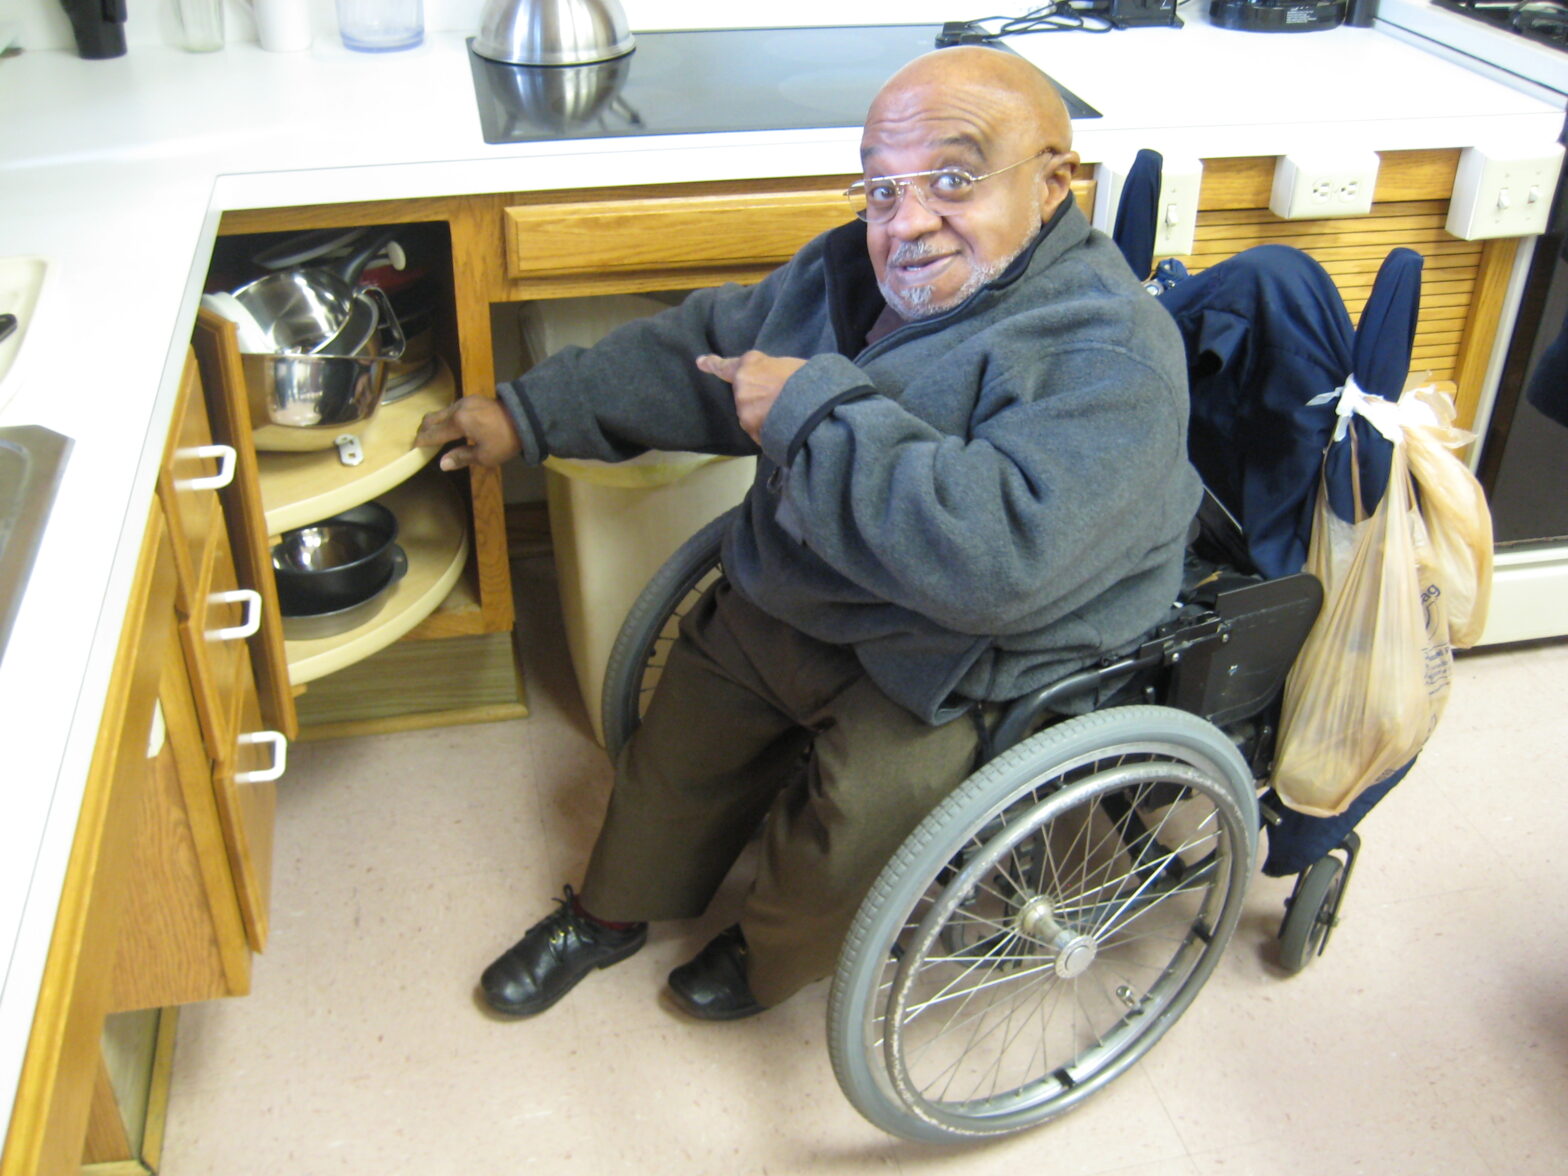 An IRC employee shows off accessible kitchen design